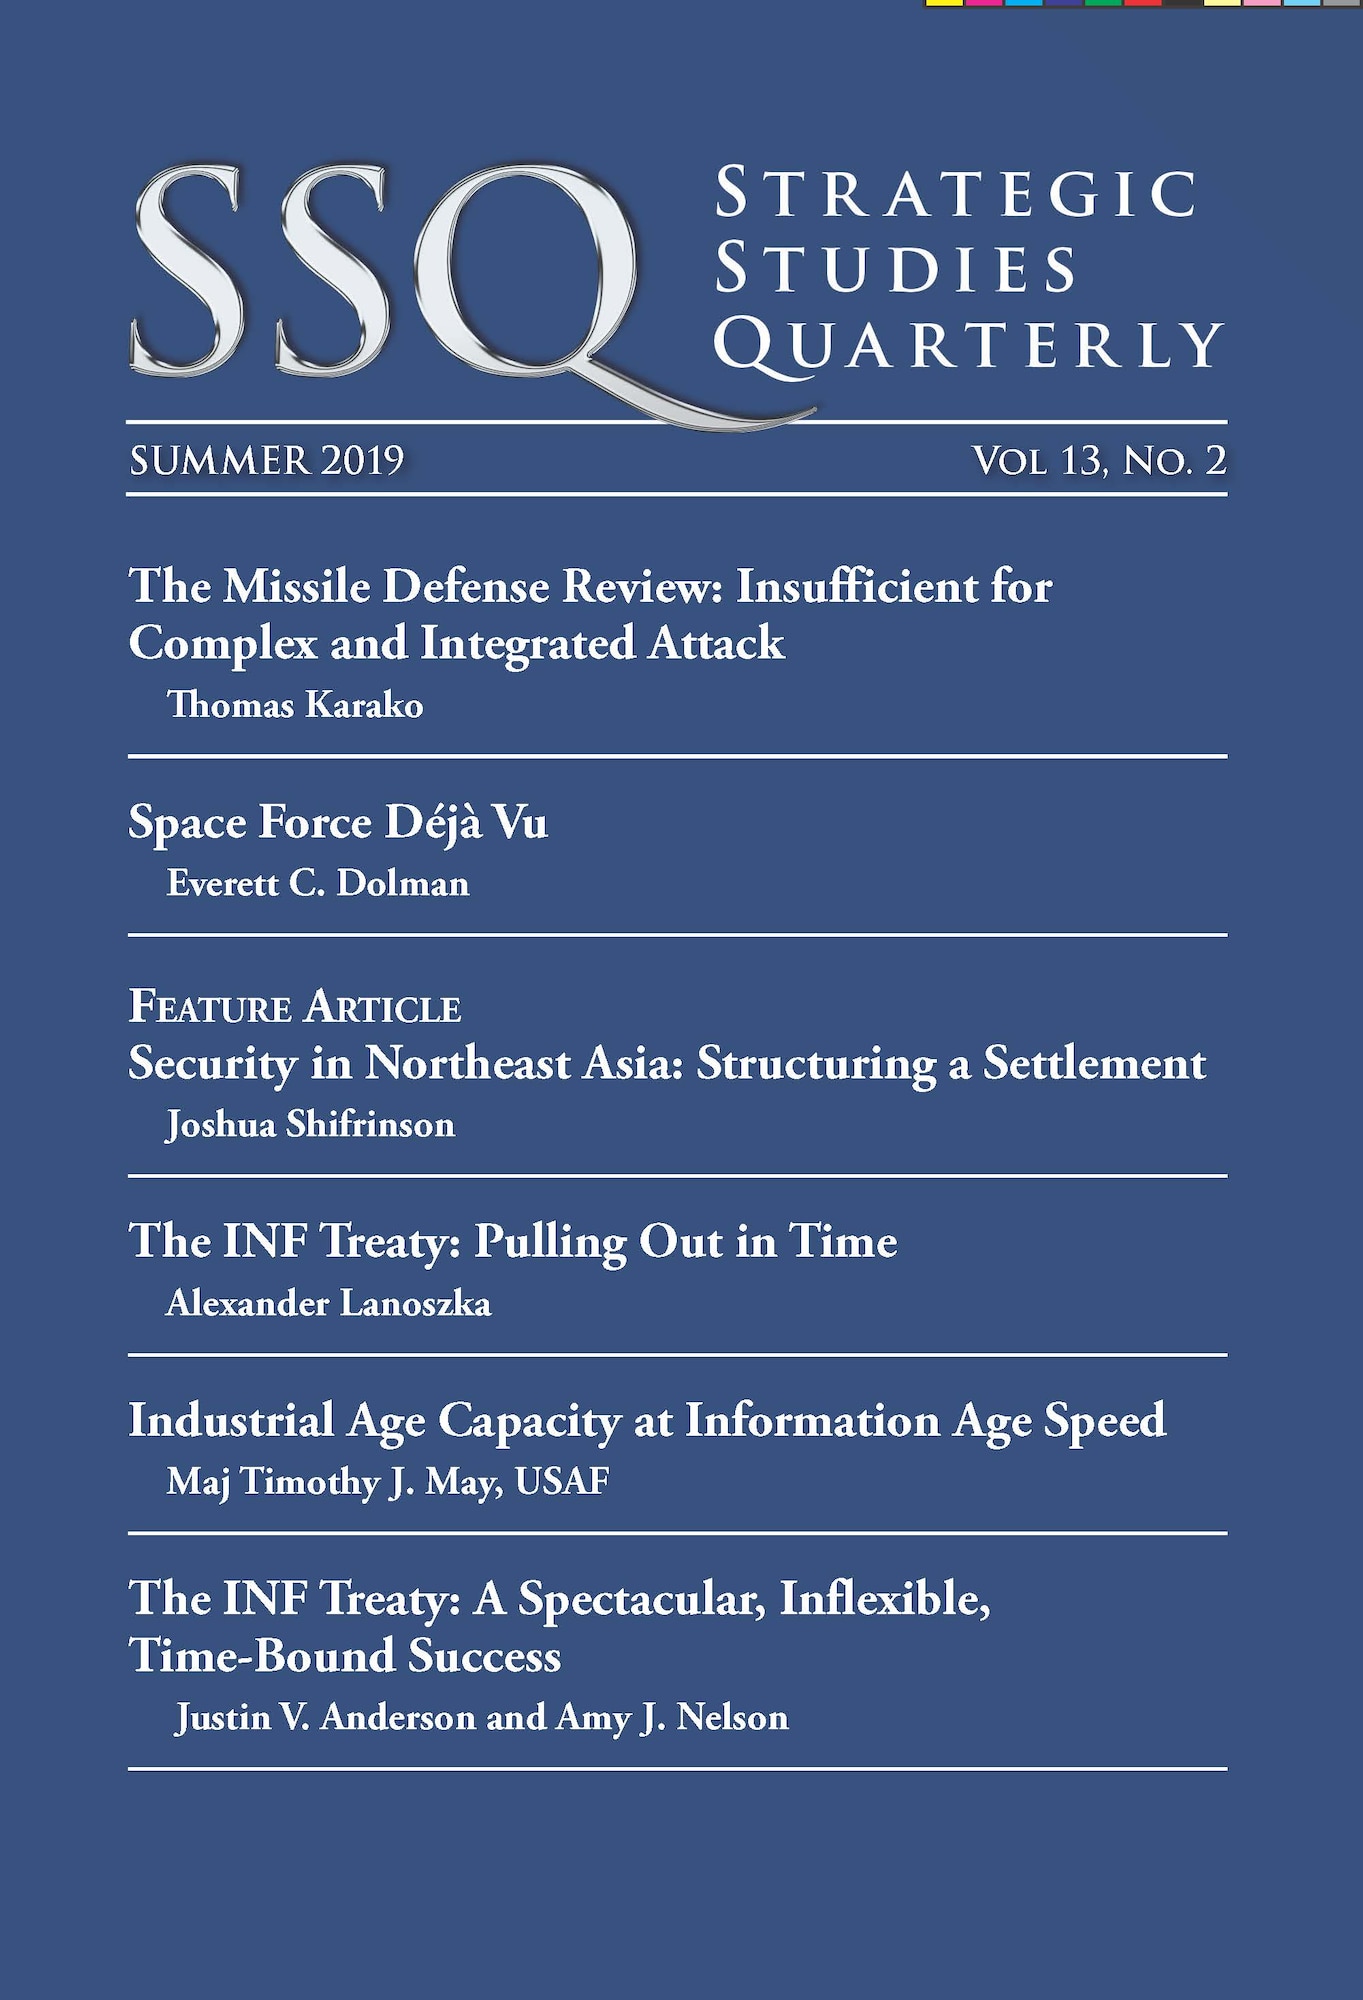 Air University Press just released the summer 2019 edition of Strategic Studies Quarterly, available at   https://www.airuniversity.af.edu/SSQ/.